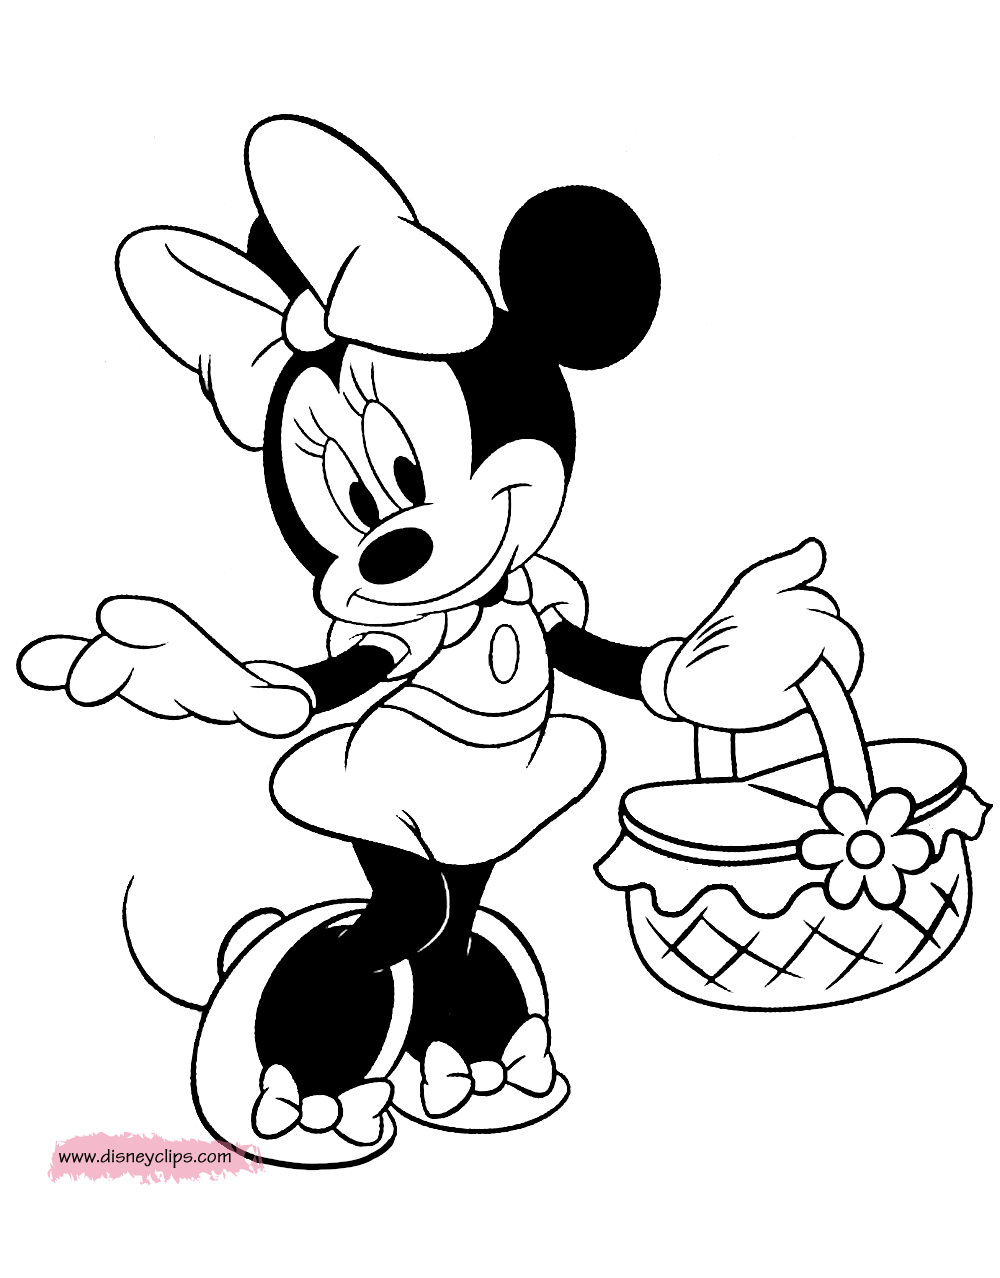 Minnie Mouse Coloring Pages 5 | Disney Coloring Book